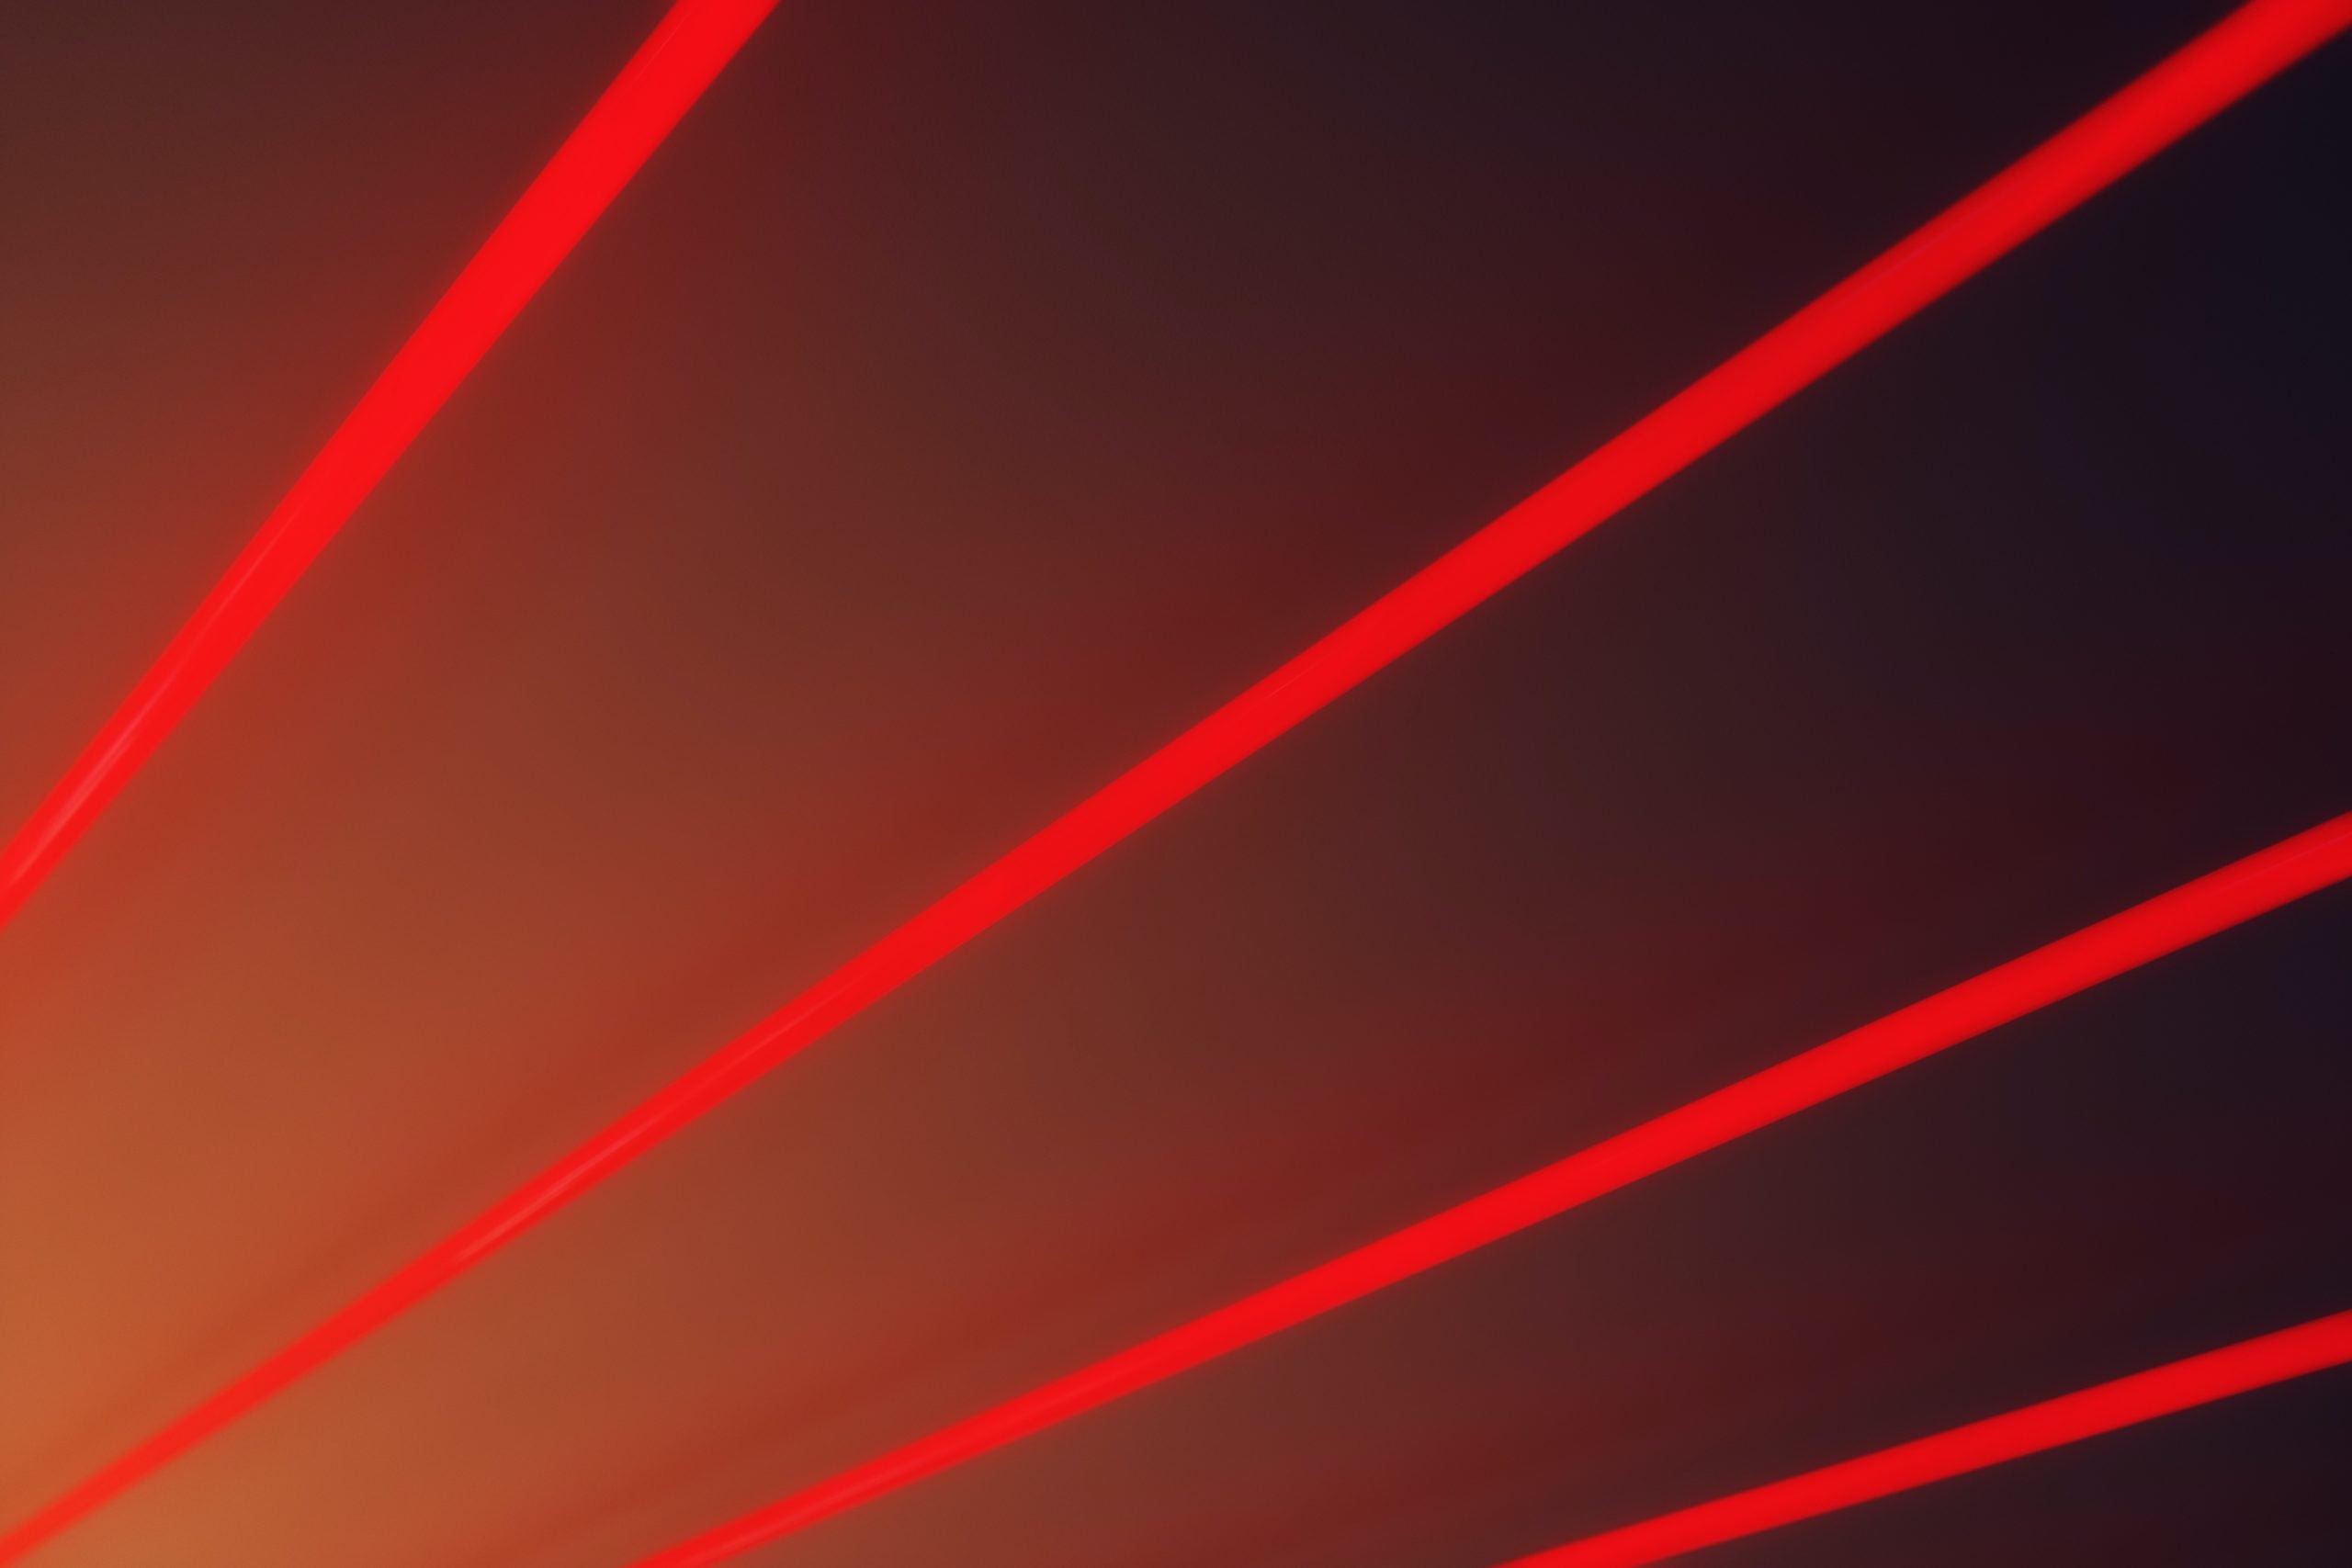 A picture showing four red straight, laser-like lines representing the sensors that make up OT and IoT devices. This article is about the top IoT security solutions which.look the next generation of smart devices and systems powering consumer and organization locations.